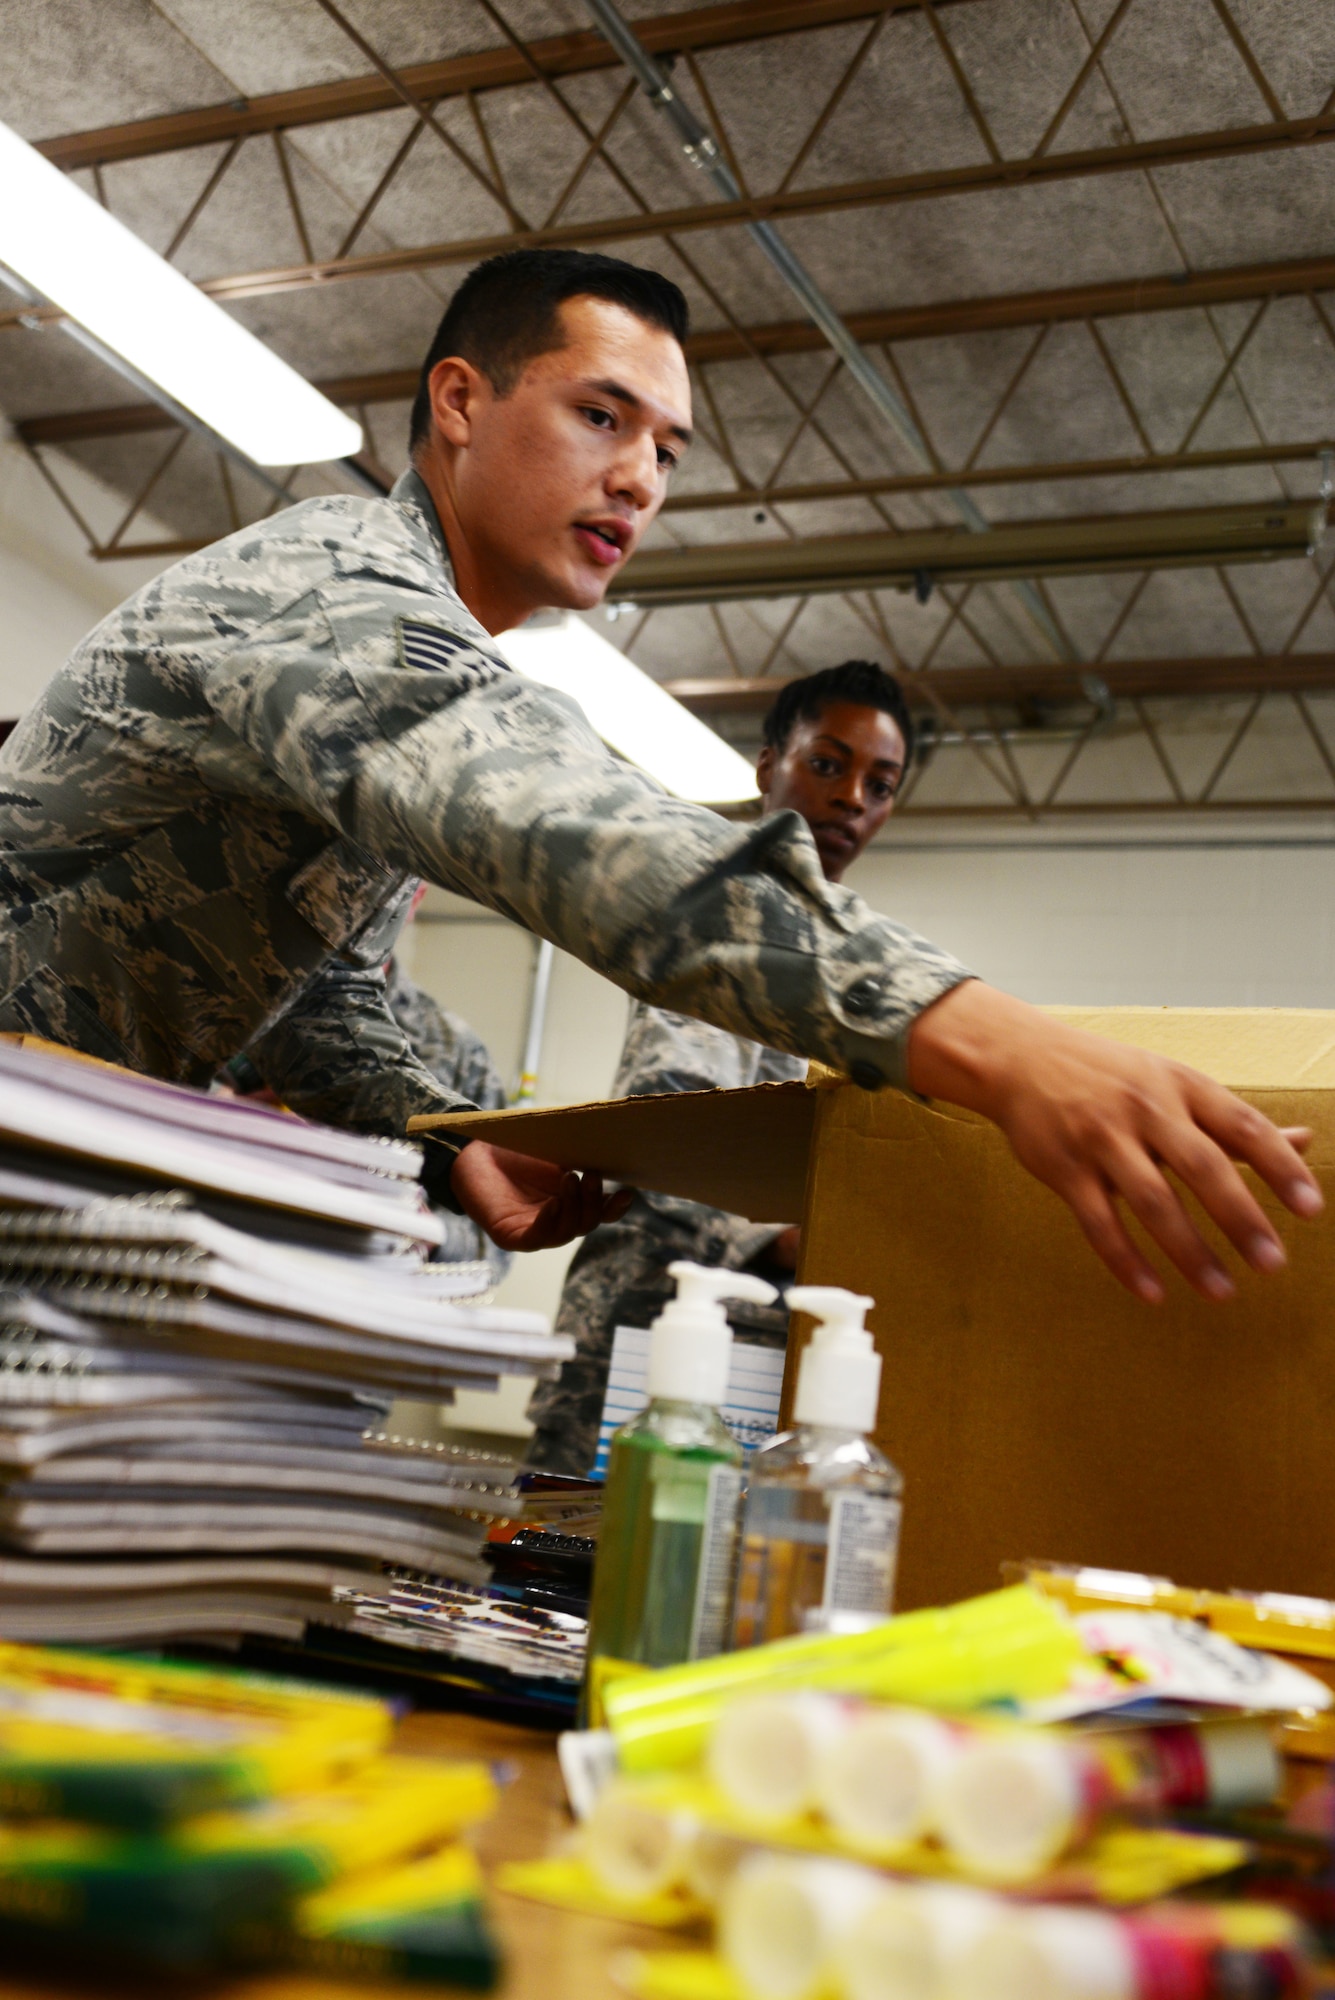 Staff Sgt. Isaiah Galvan and other members of the Space and Missile Systems Center’s Advanced Systems and Development Directorate sort through donated school supplies during a school supply drop at Kirtland Elementary School here Aug. 10. Galvan and other members of SMC AD dropped 1020 lbs. of supplies donated by the Kirtland community. The drive is conducted annually by local units under AFSPC. (U.S. Air Force photo by Jessie Perkins)